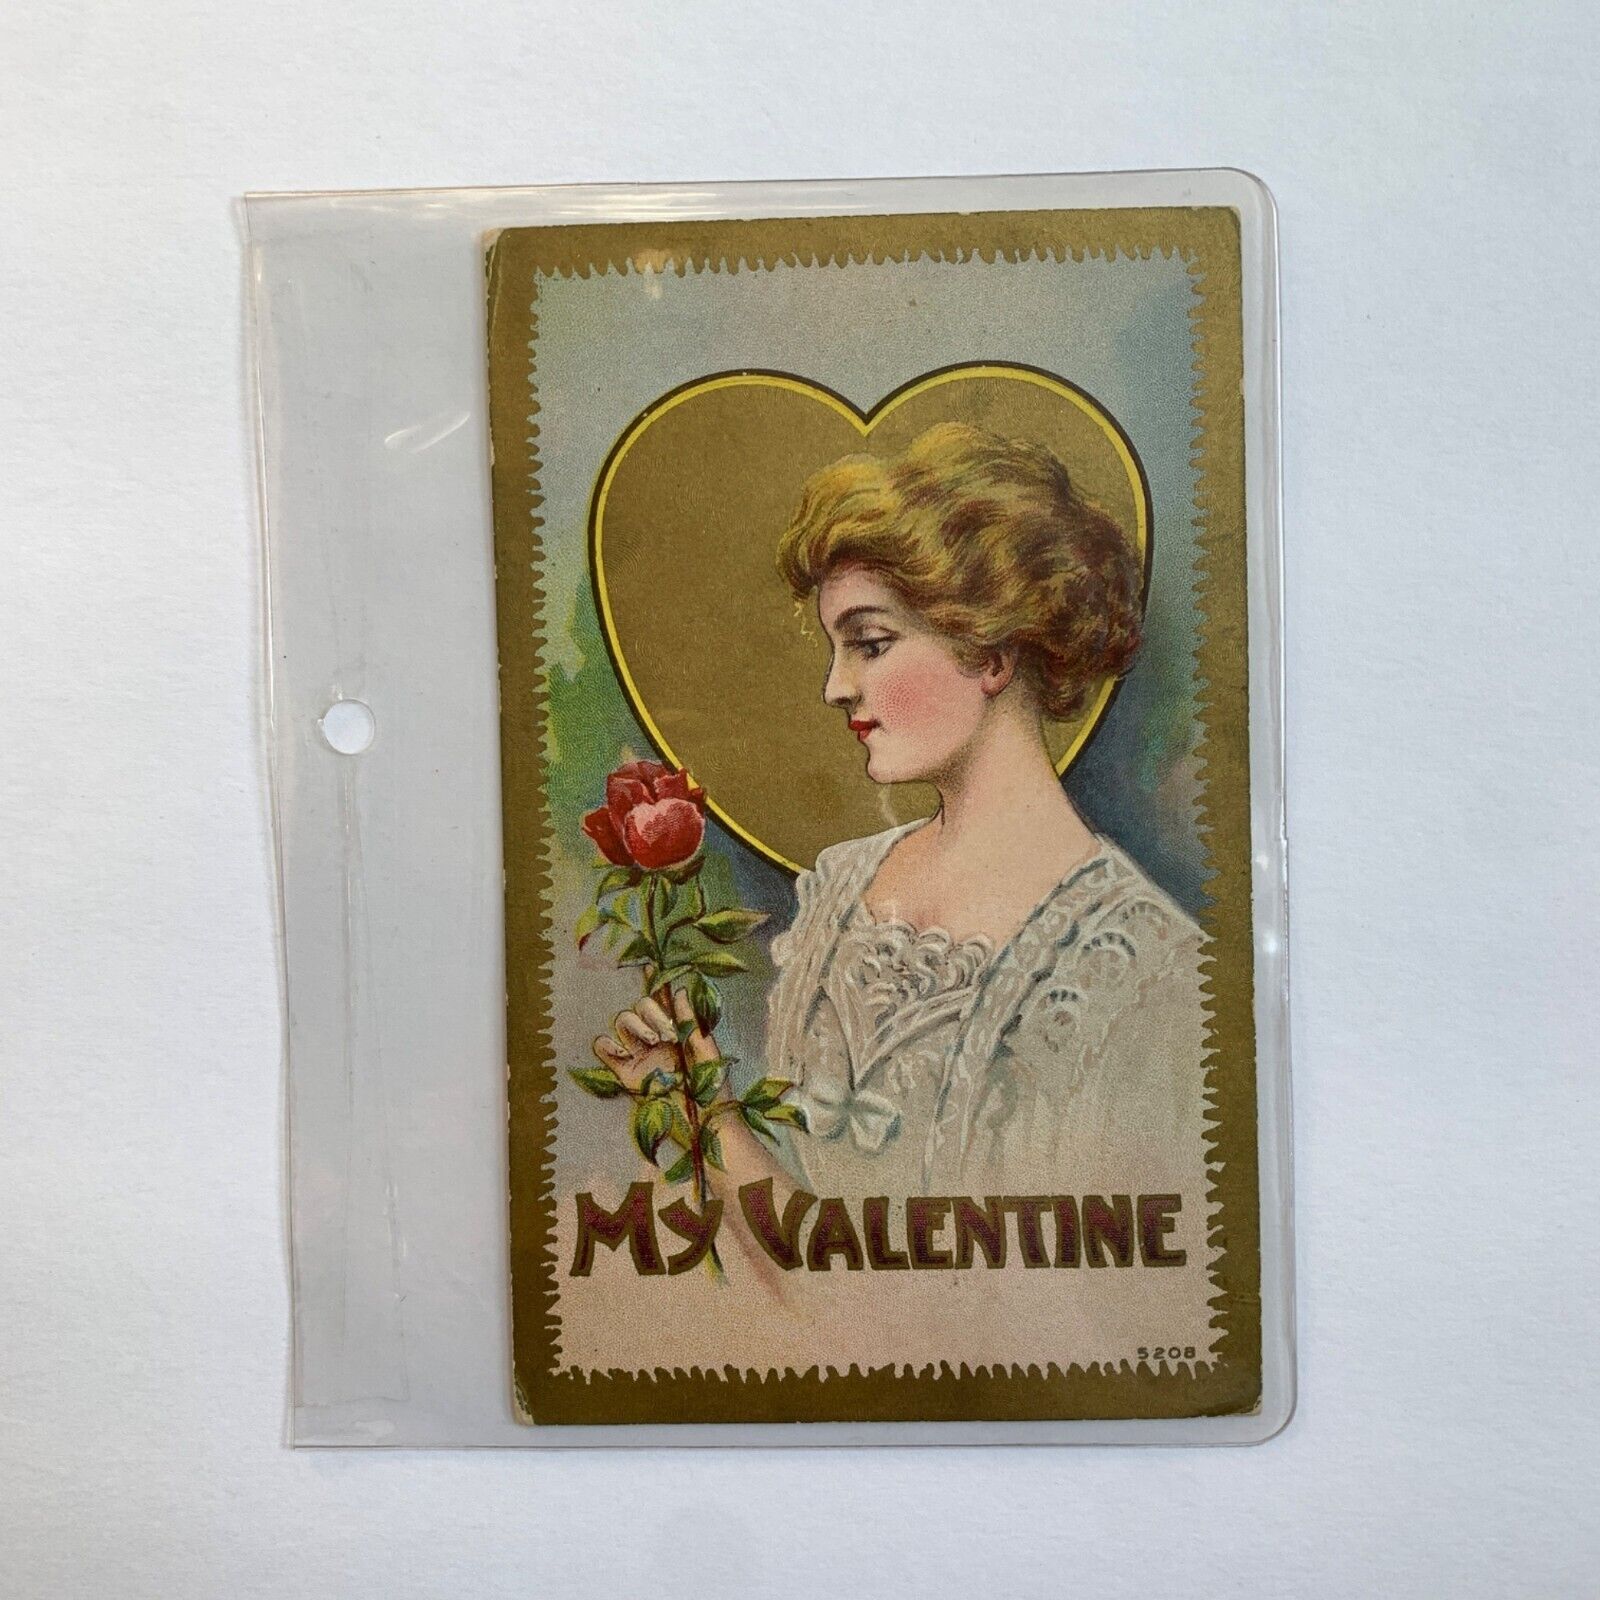 1910 Antique Valentine's Day Postcard Stamped Woman Heart Rose